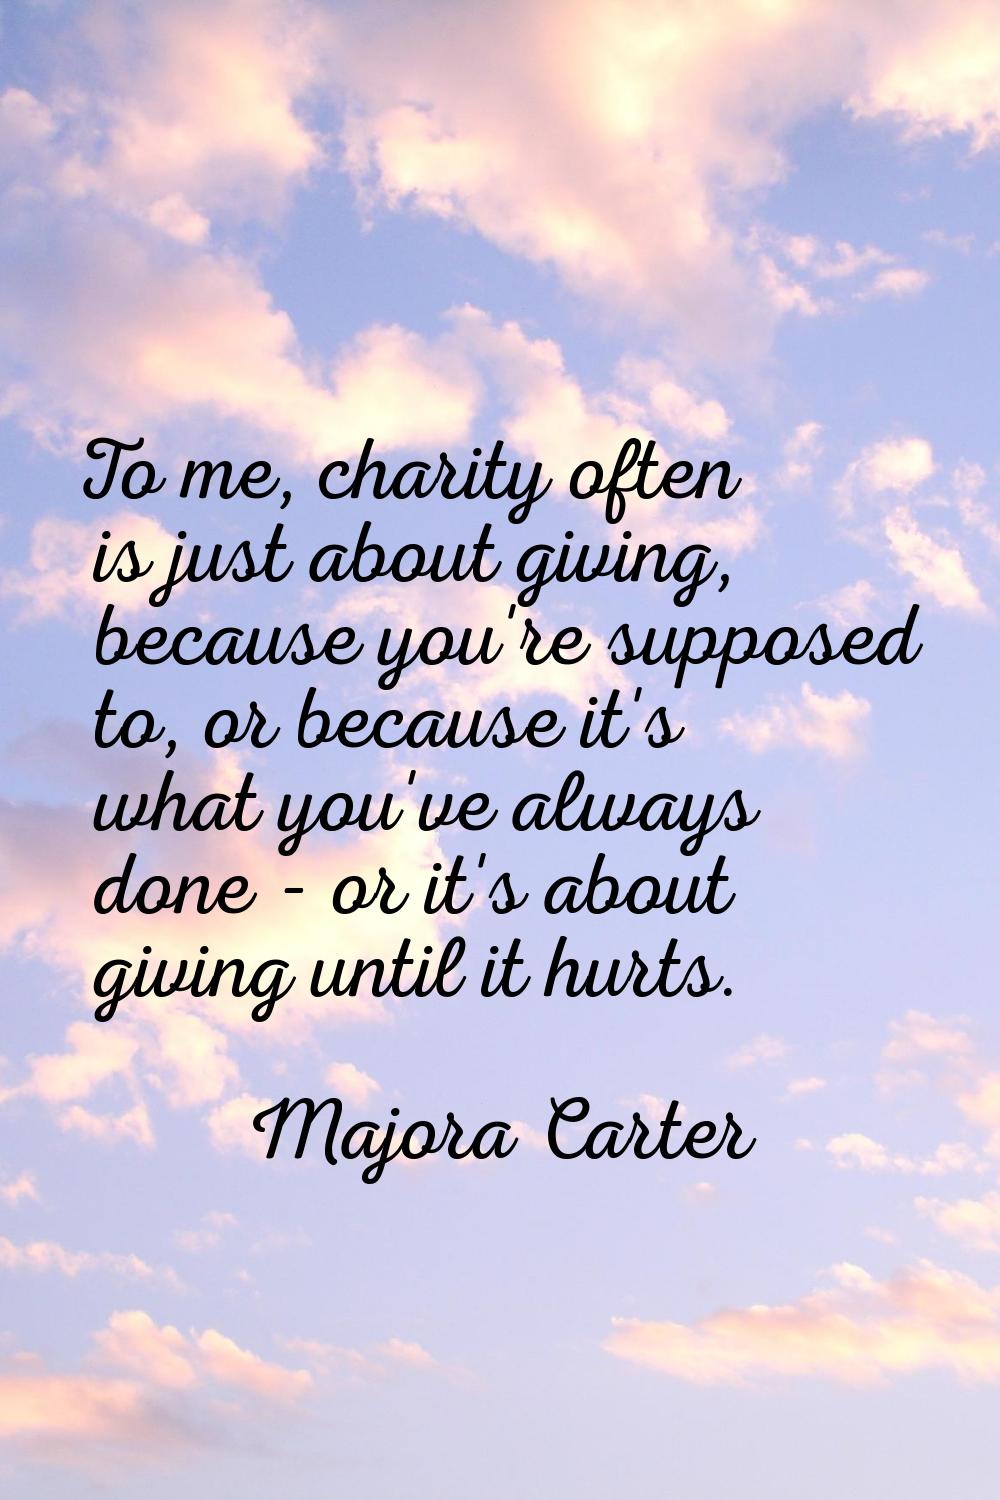 To me, charity often is just about giving, because you're supposed to, or because it's what you've 